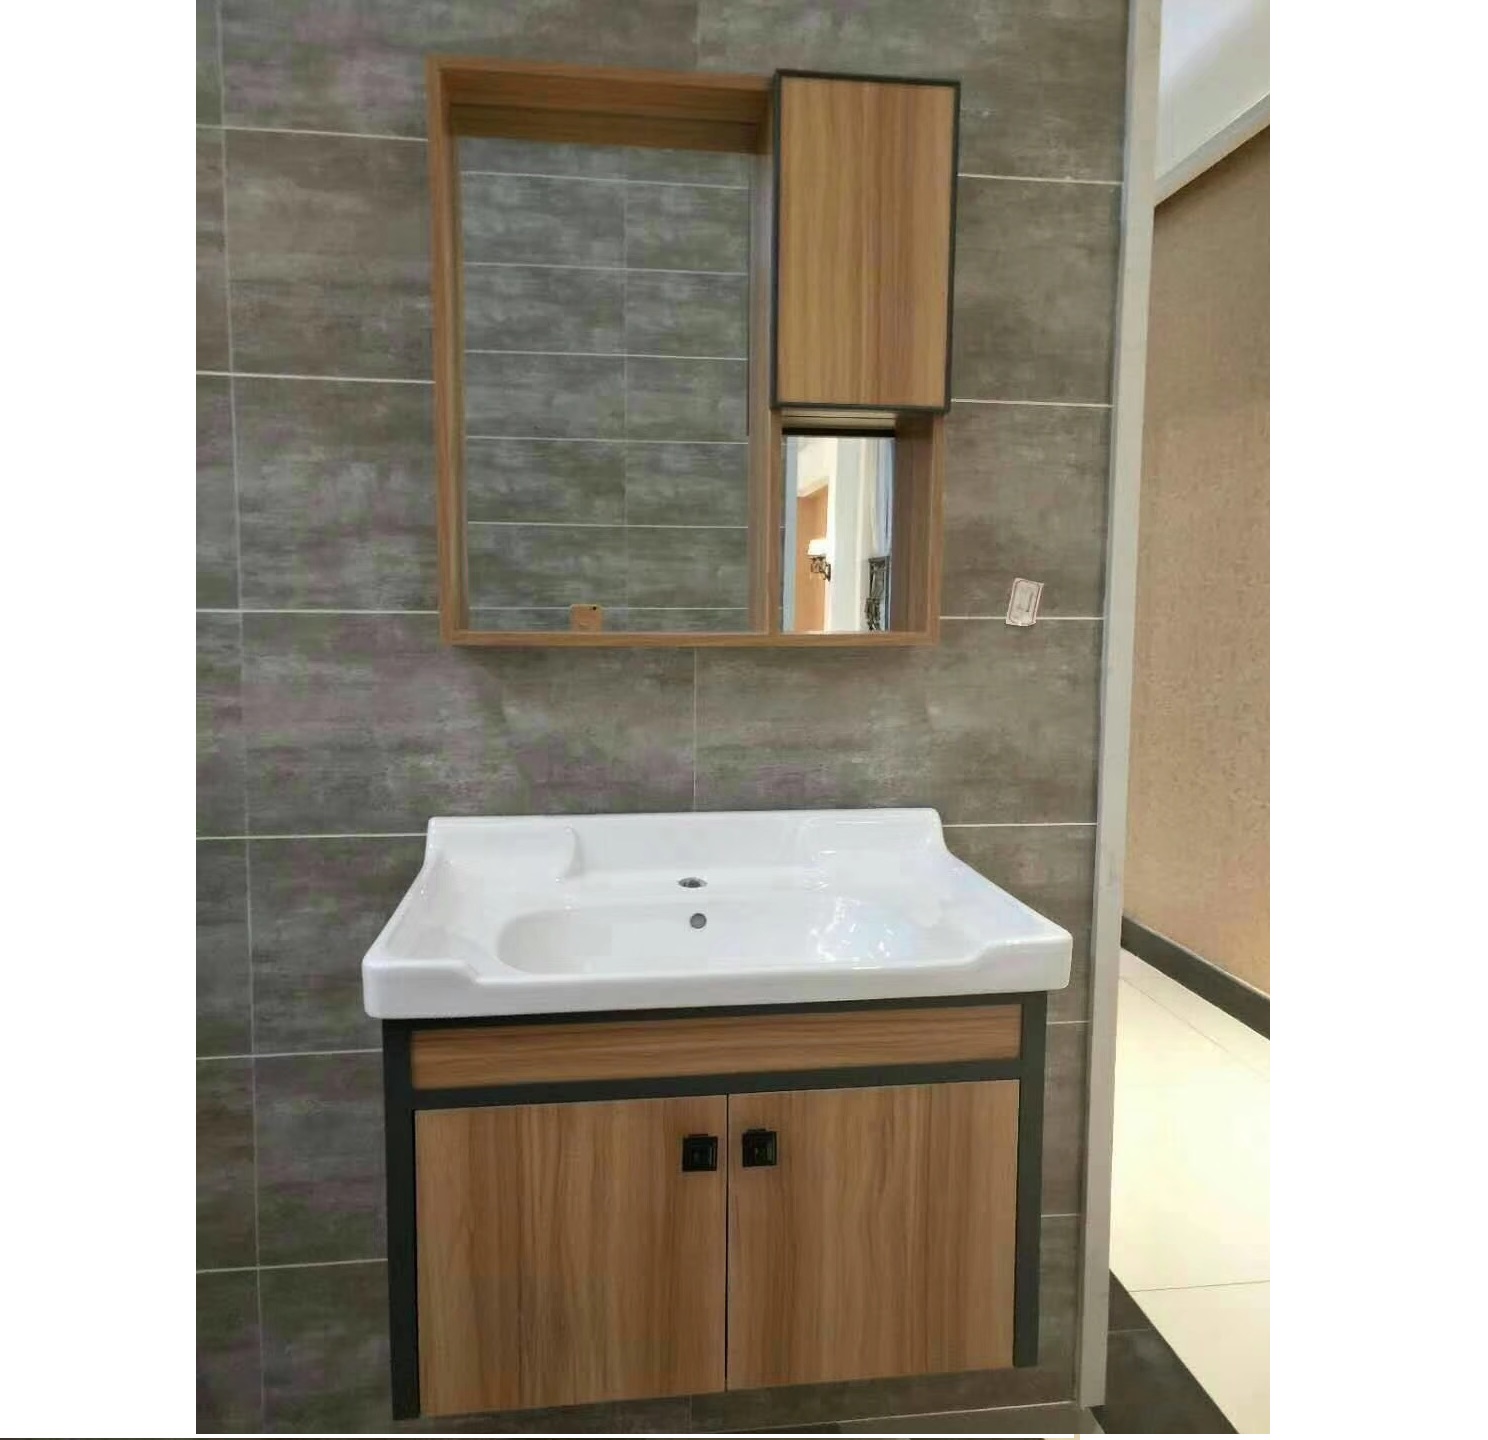 70cm bathroom storage cabinet with side cabinet wood pattern finish